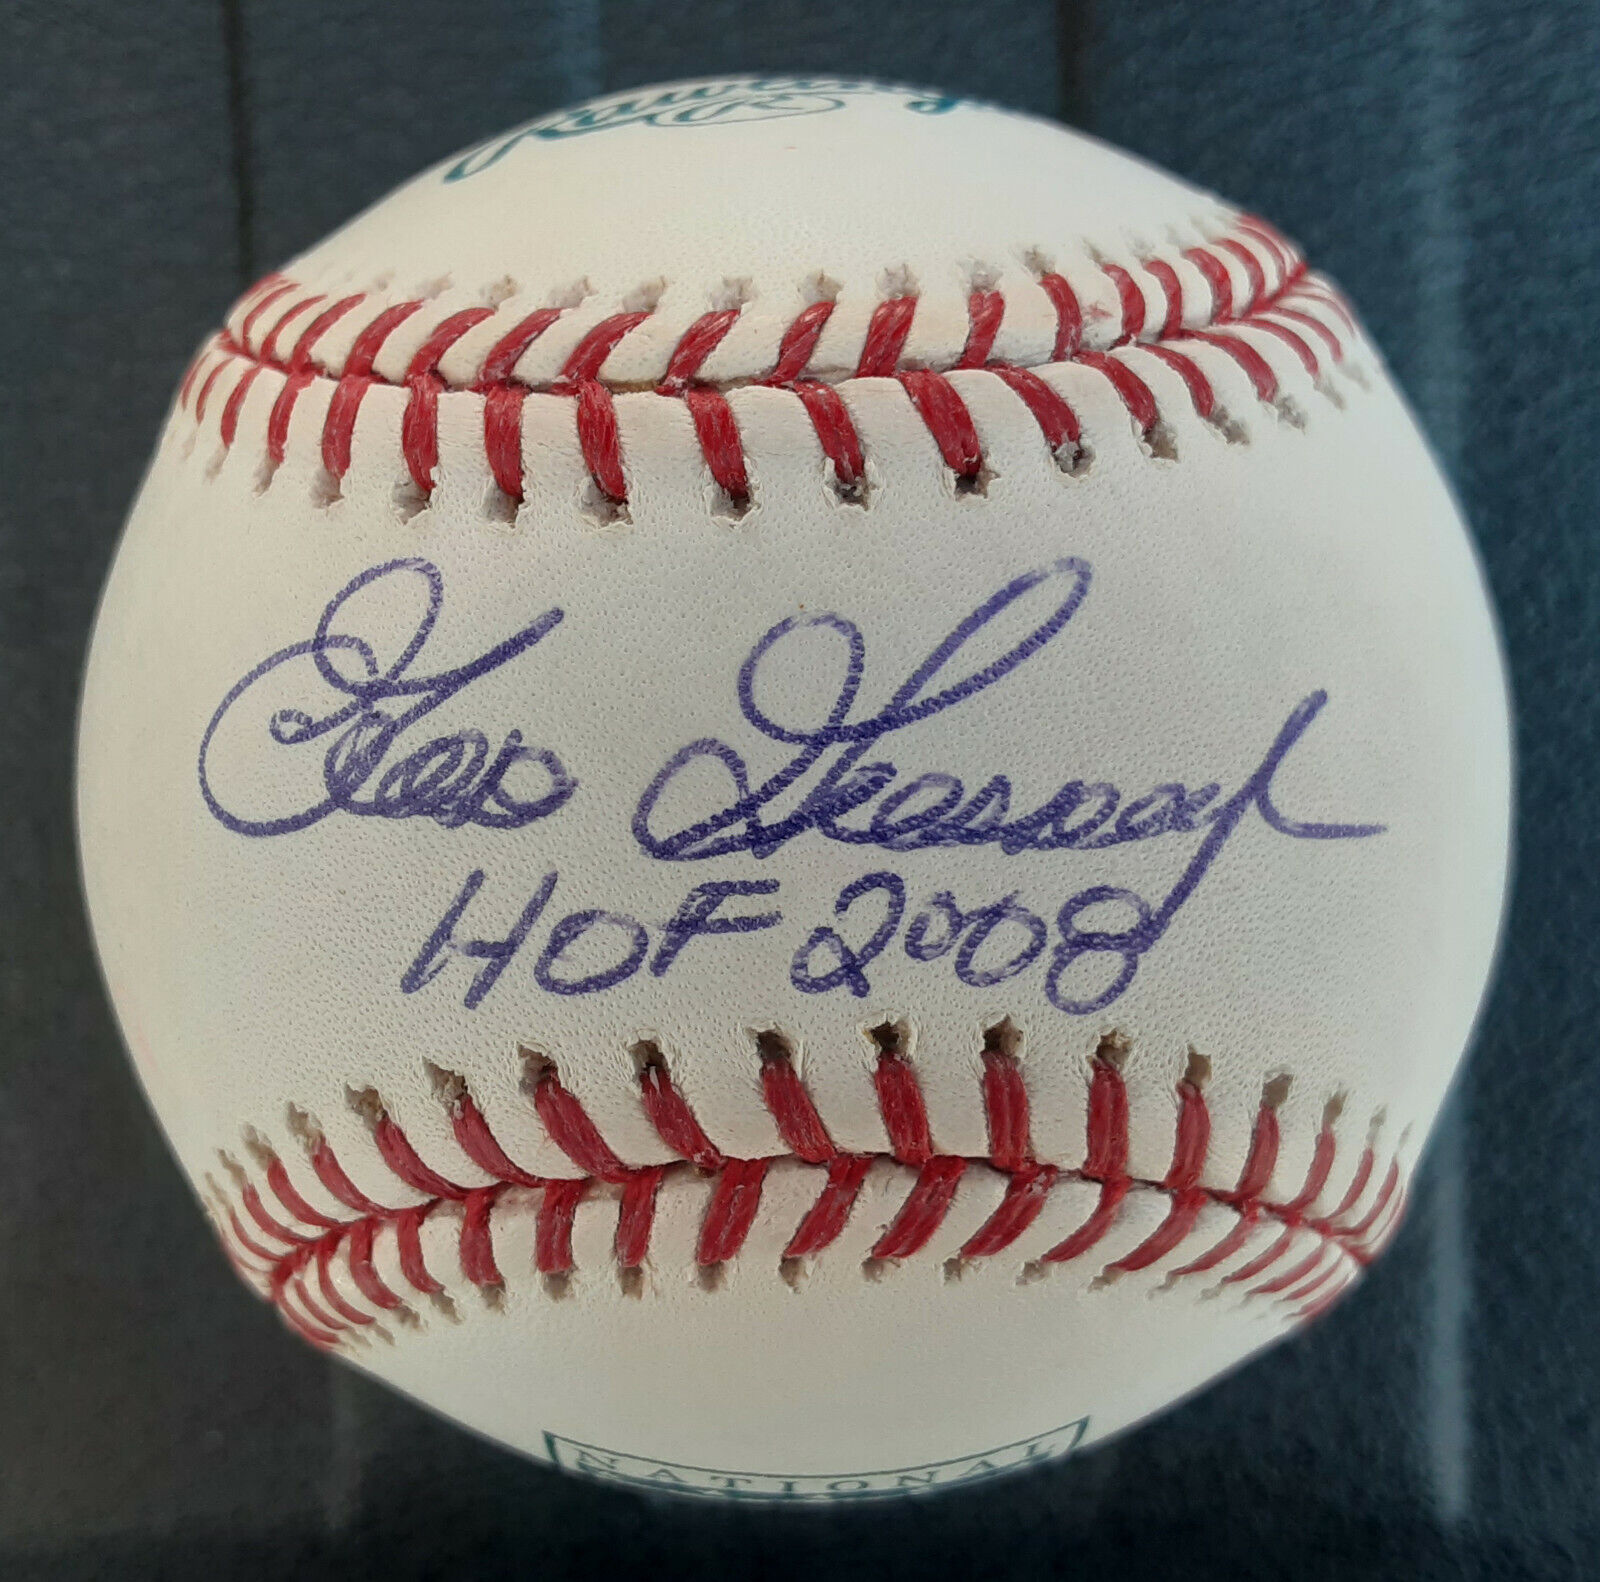 Goose Gossage autographed authentic 2008 Hall of Fame MLB baseball 